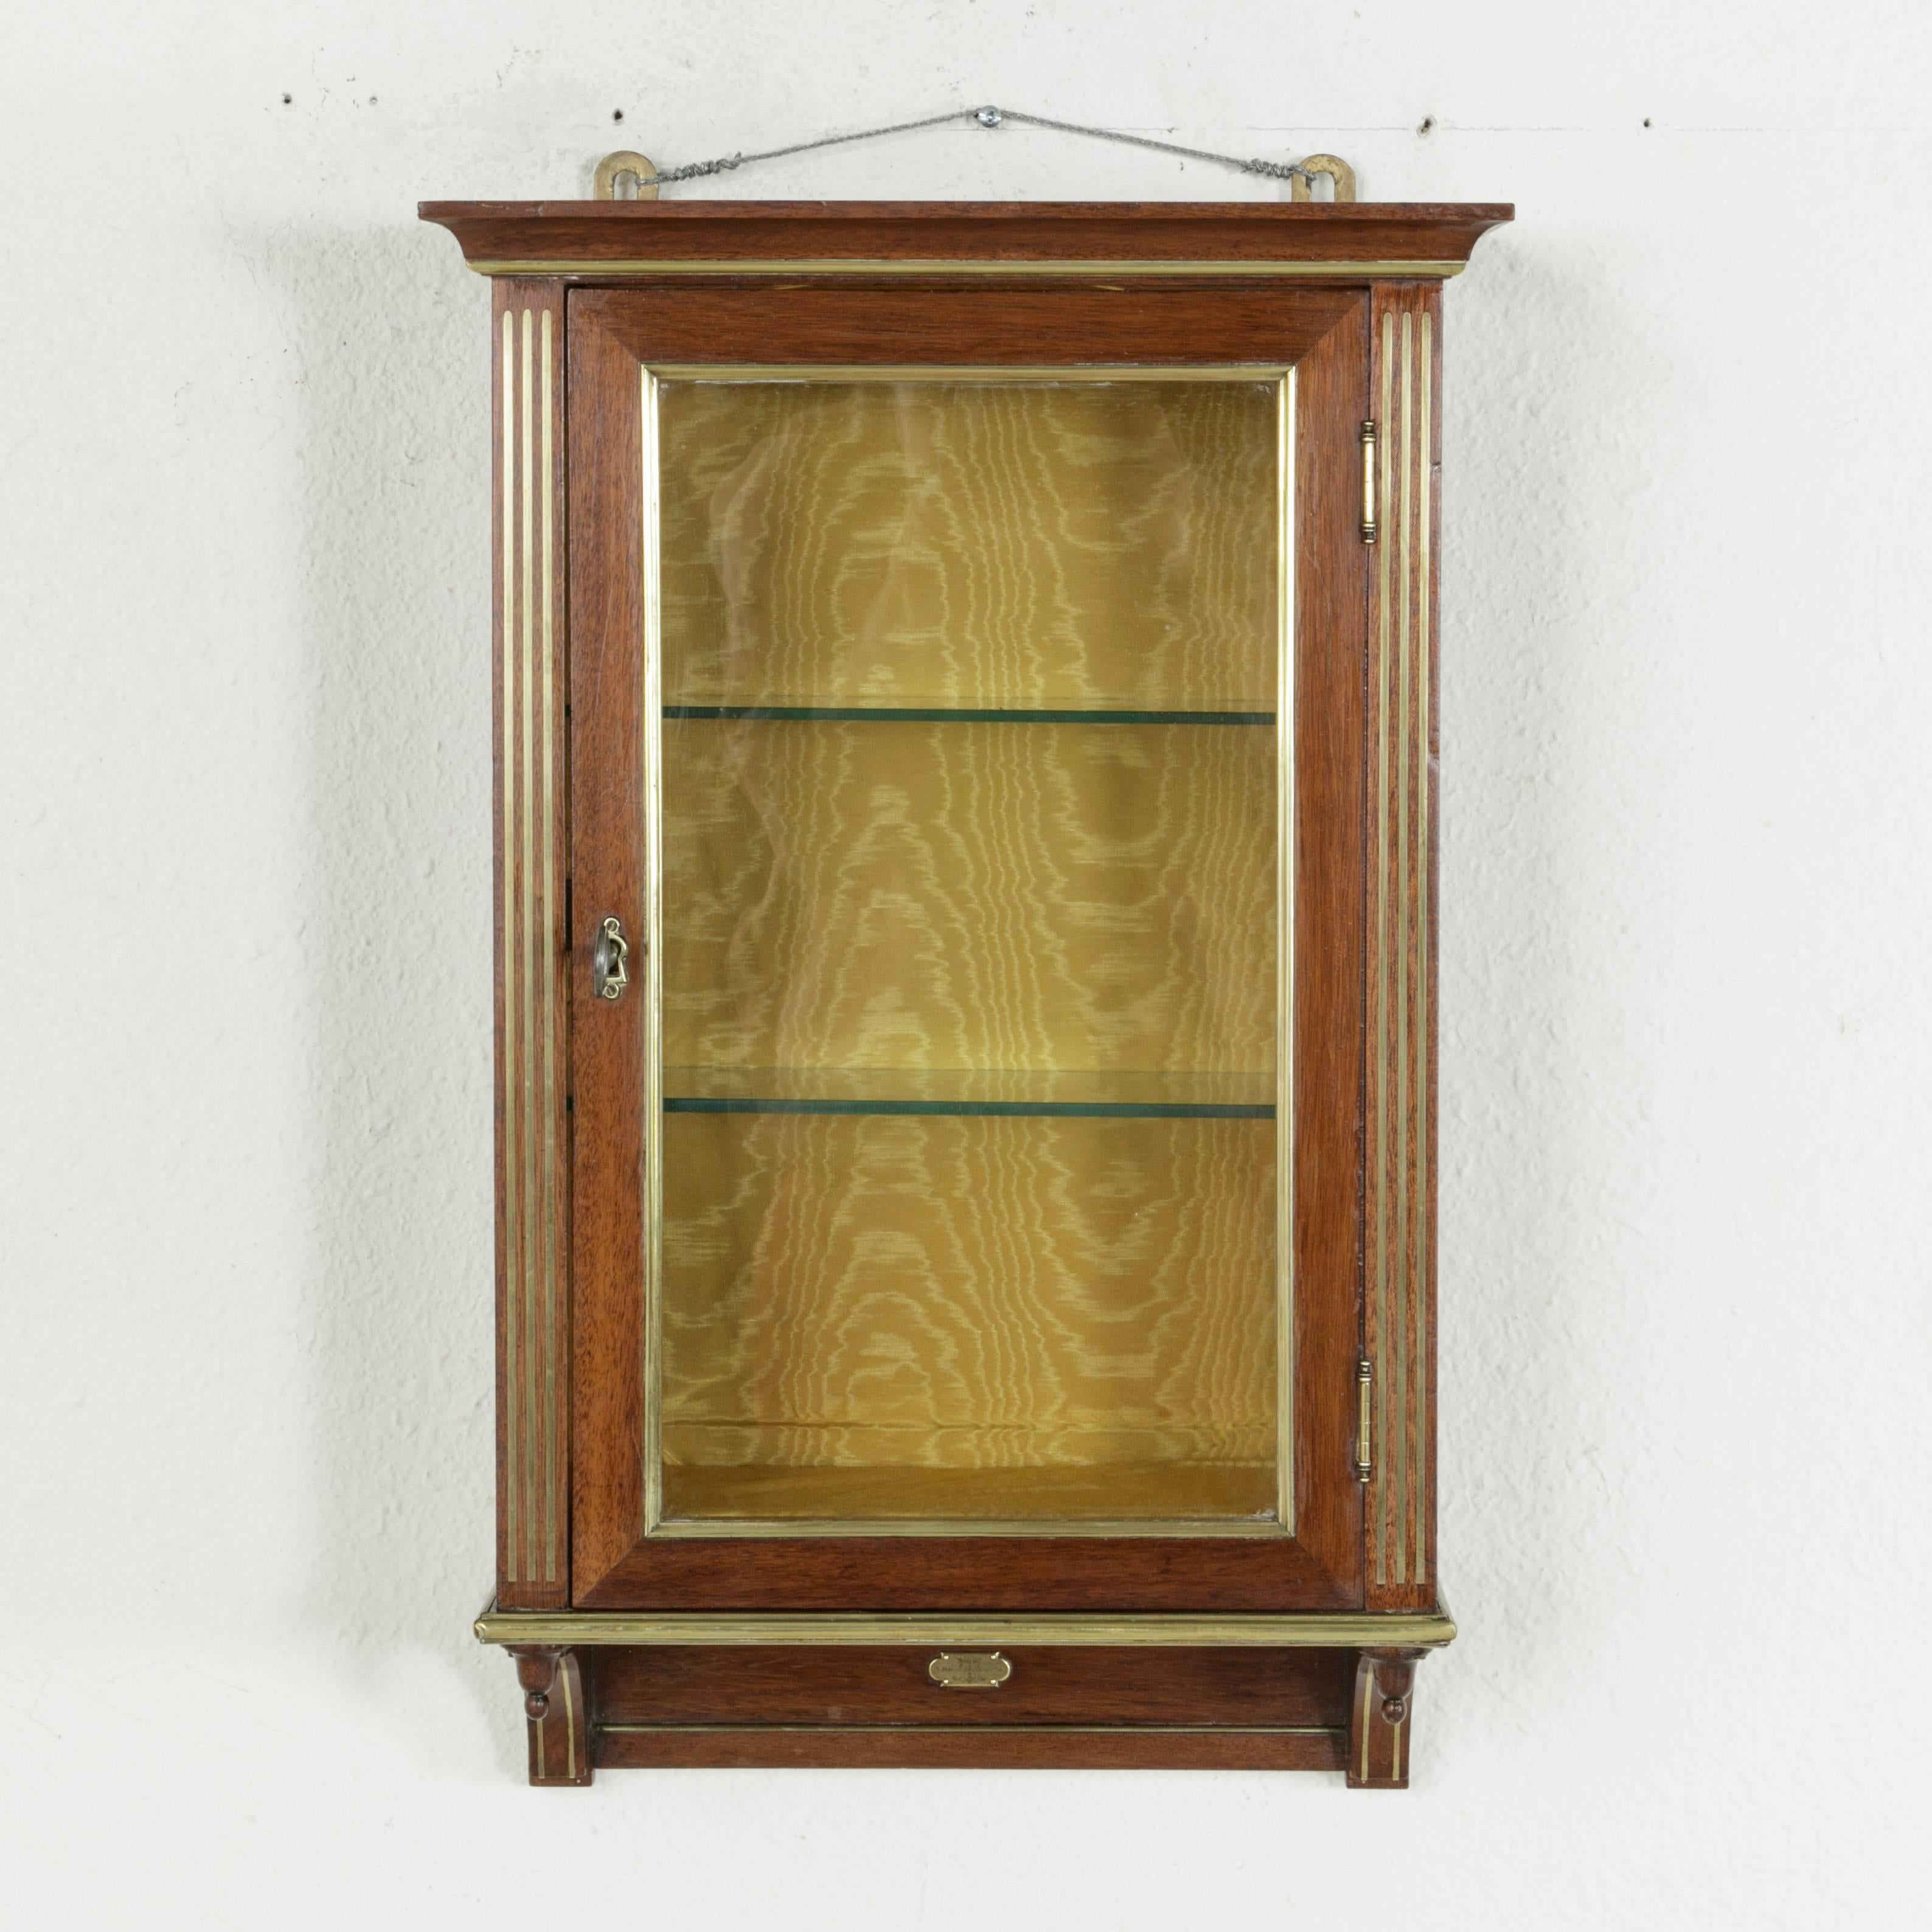 This early 20th century French Louis XVI style mahogany wall vitrine or display cabinet features fluted corners of bronze inlay as well as additional bronze detailing that accentuates its clean lines. The single door is framed in bronze and boasts